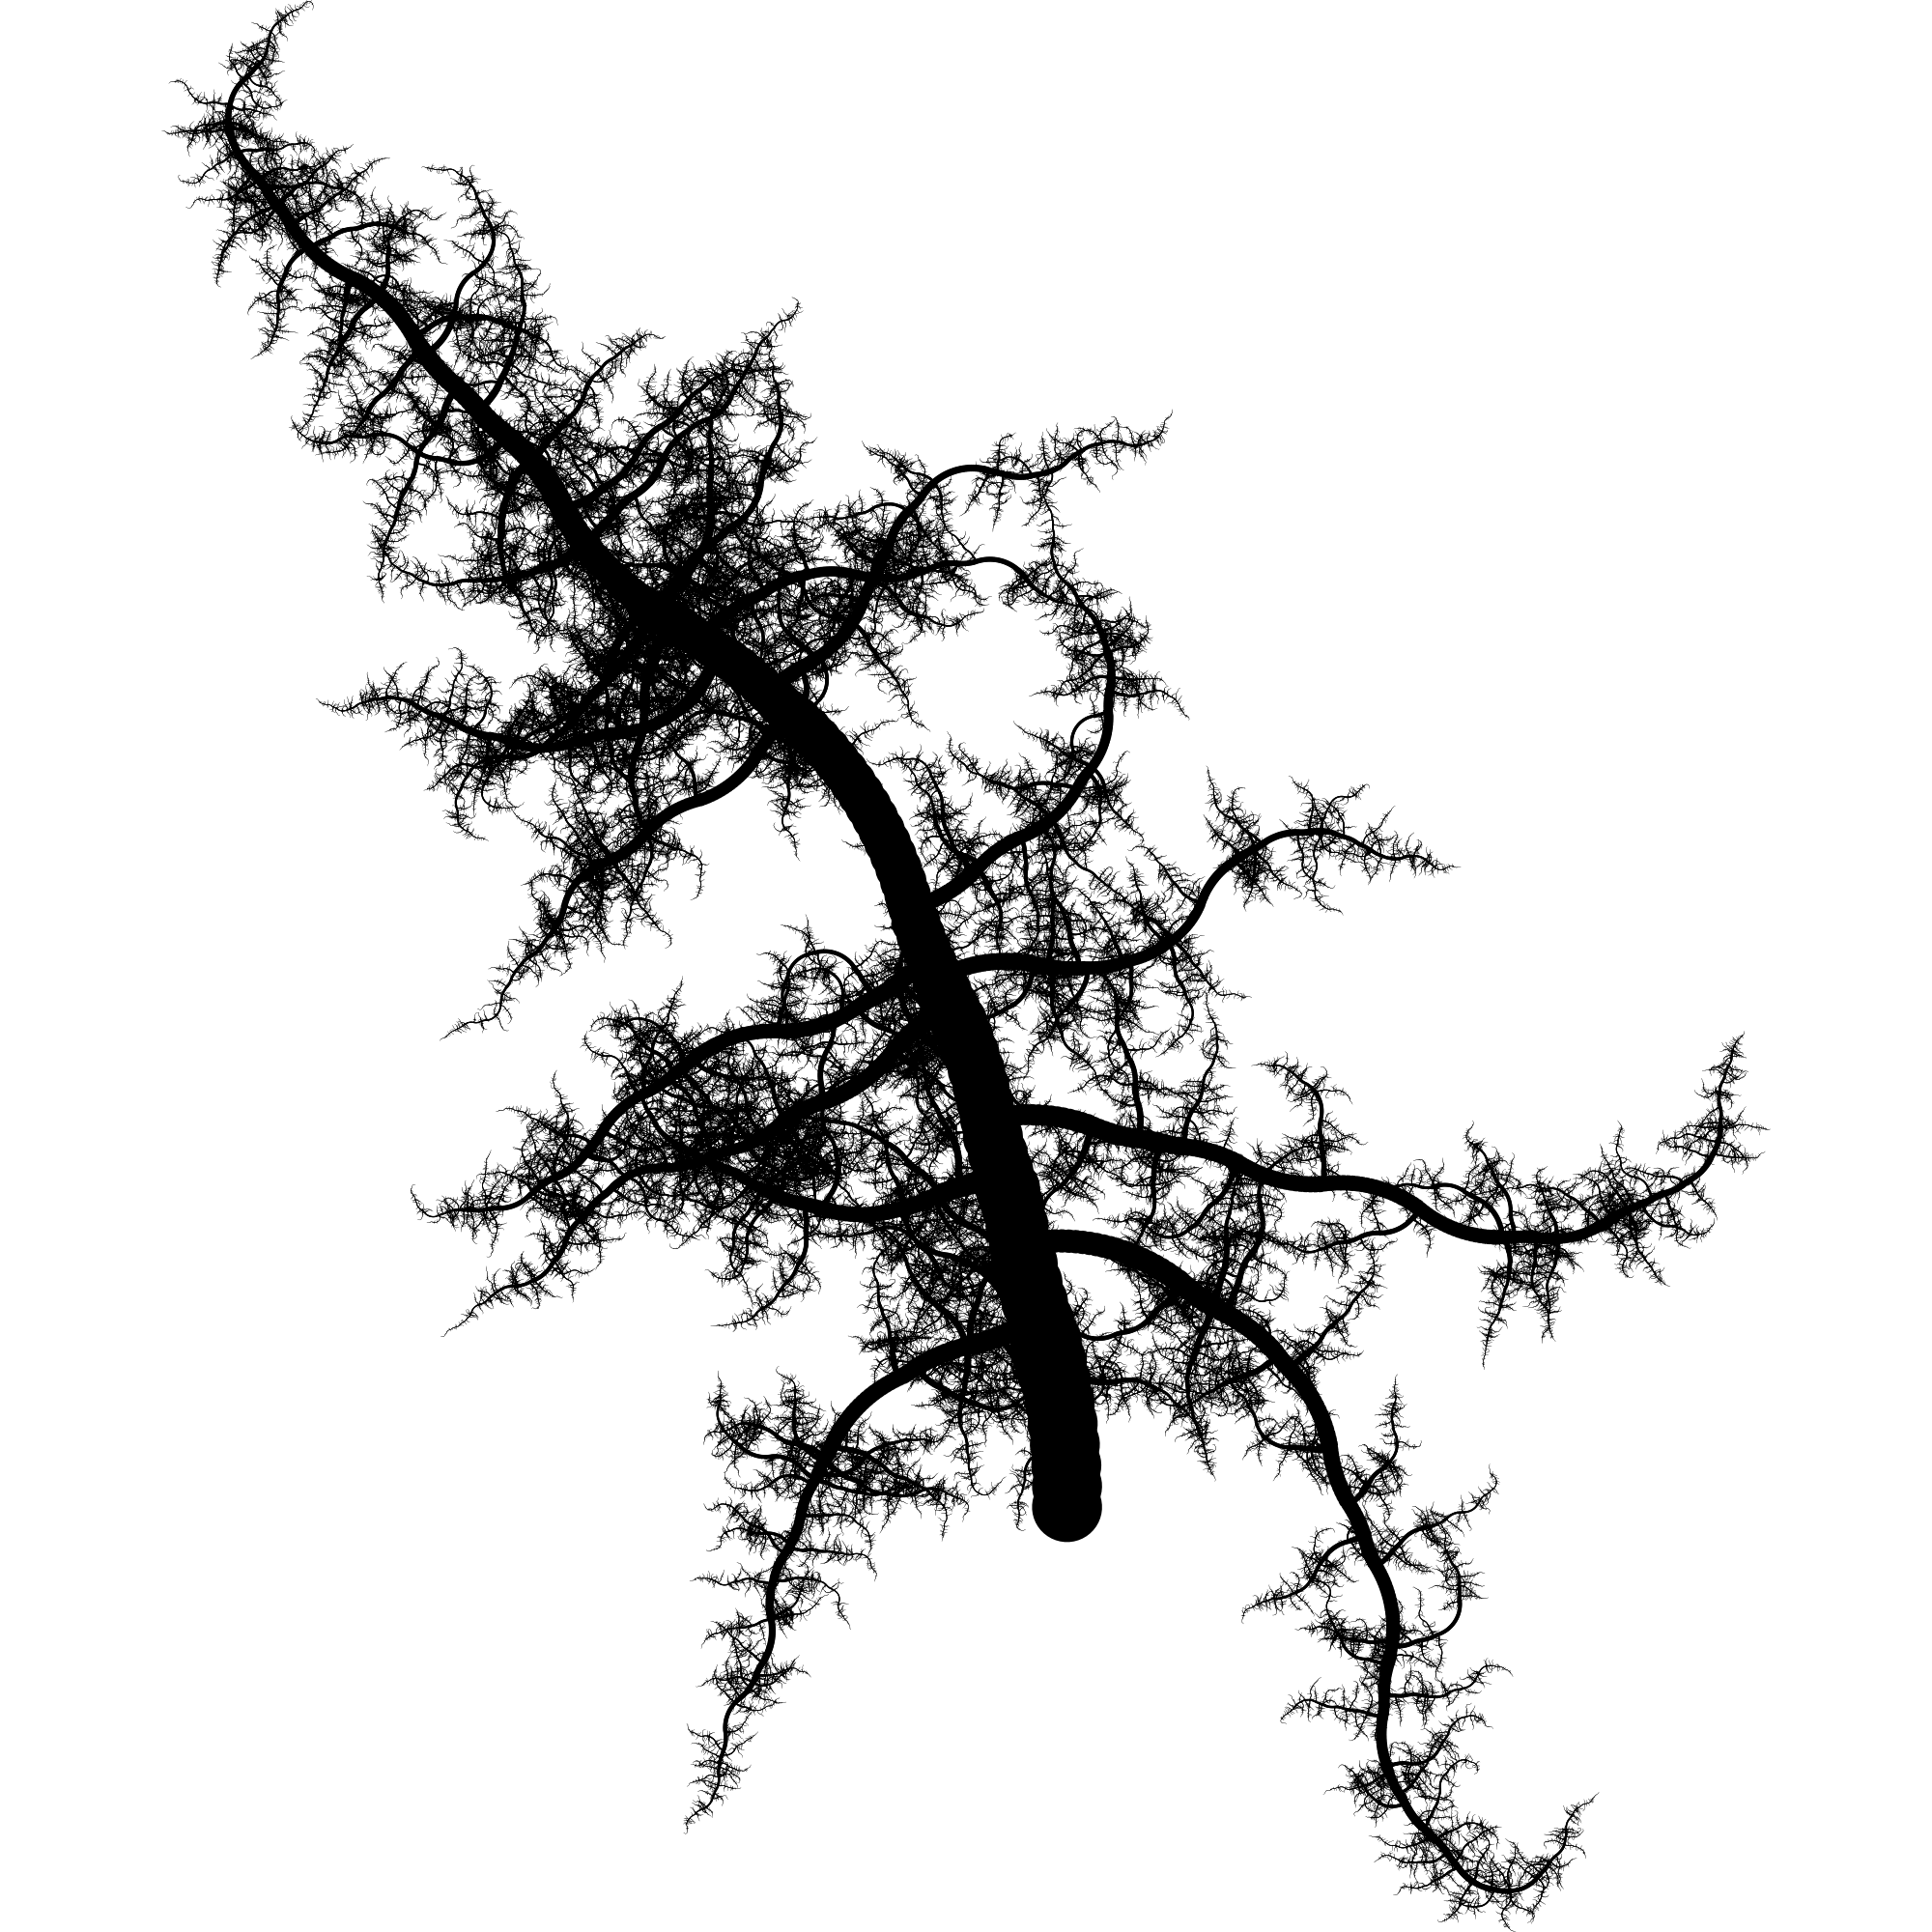 file contextfree root png wikimedia commons https commons wikimedia org wiki file contextfree root png